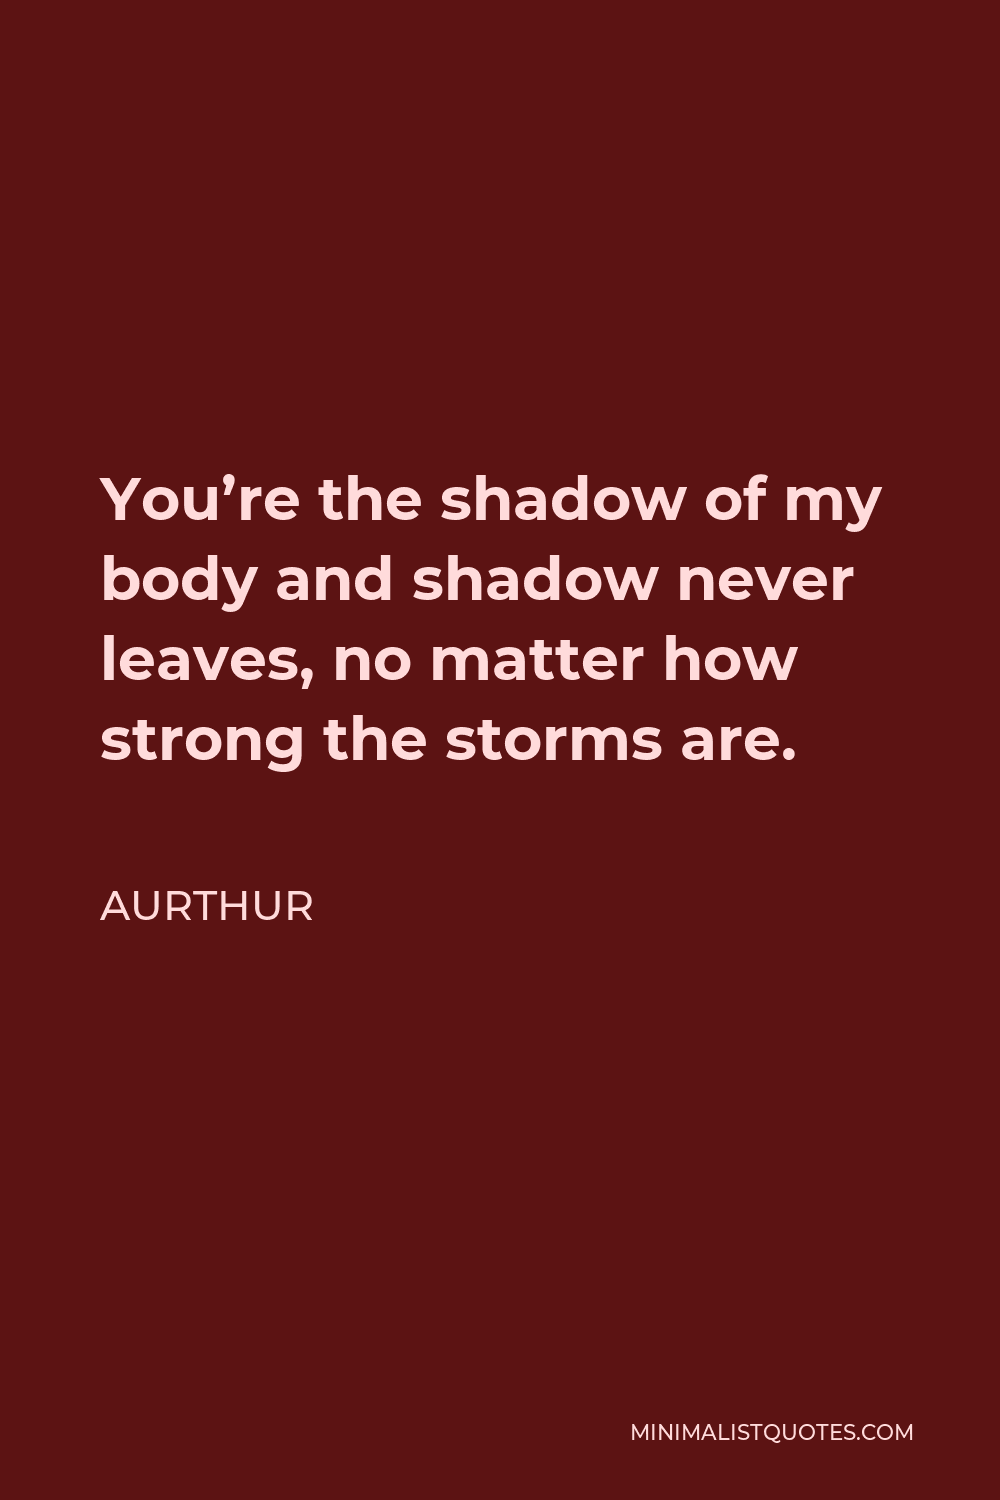 Aurthur Quote - You’re the shadow of my body and shadow never leaves, no matter how strong the storms are.